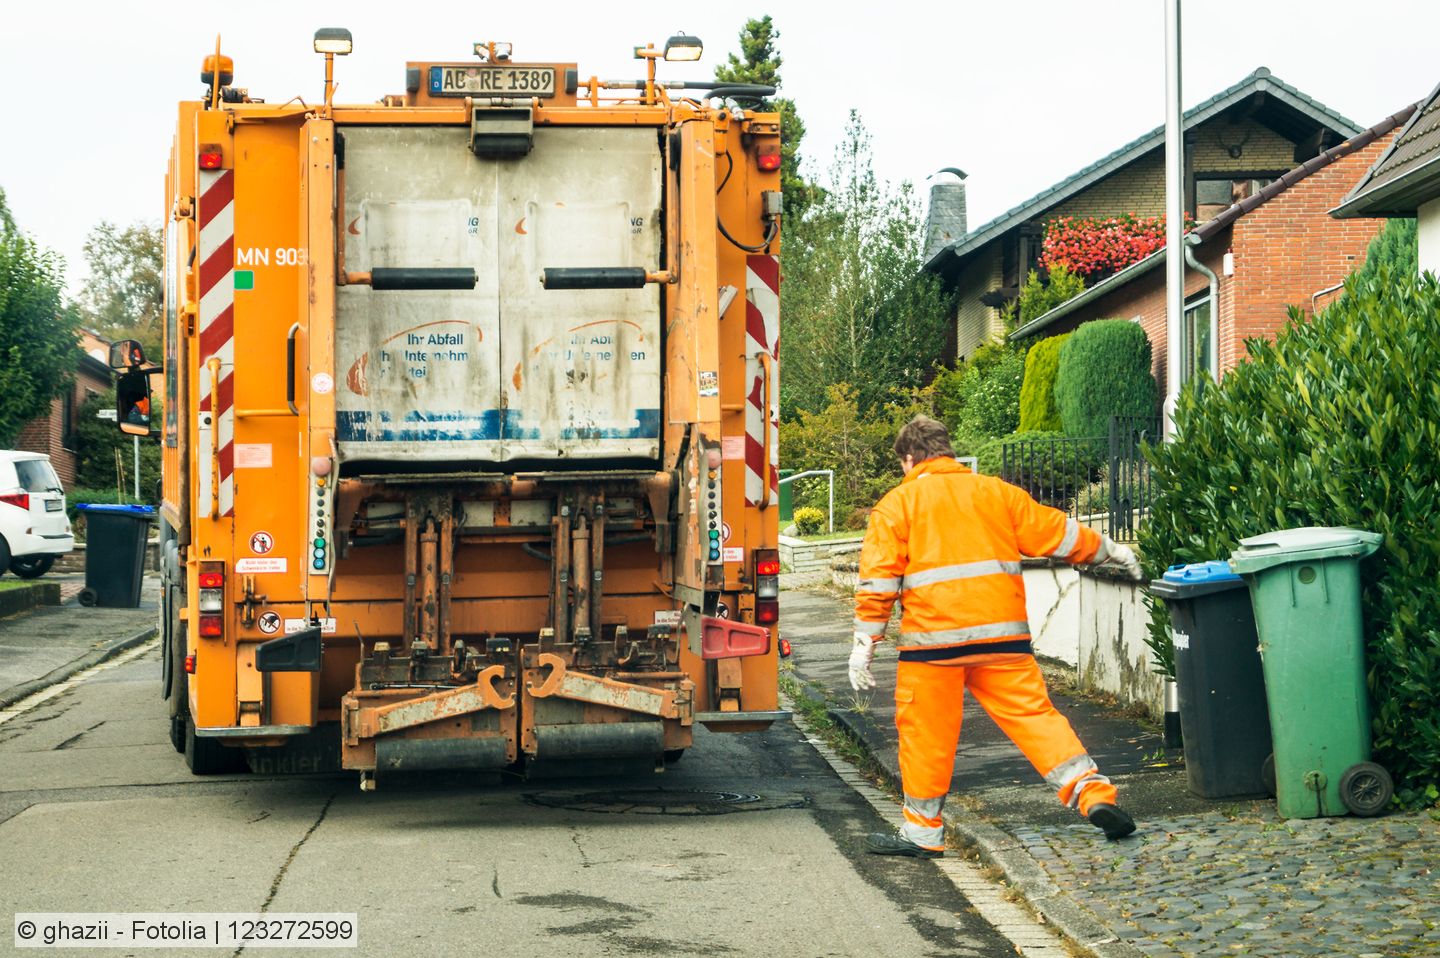 Proposed Dutch tax on residual waste would hit UK waste management 